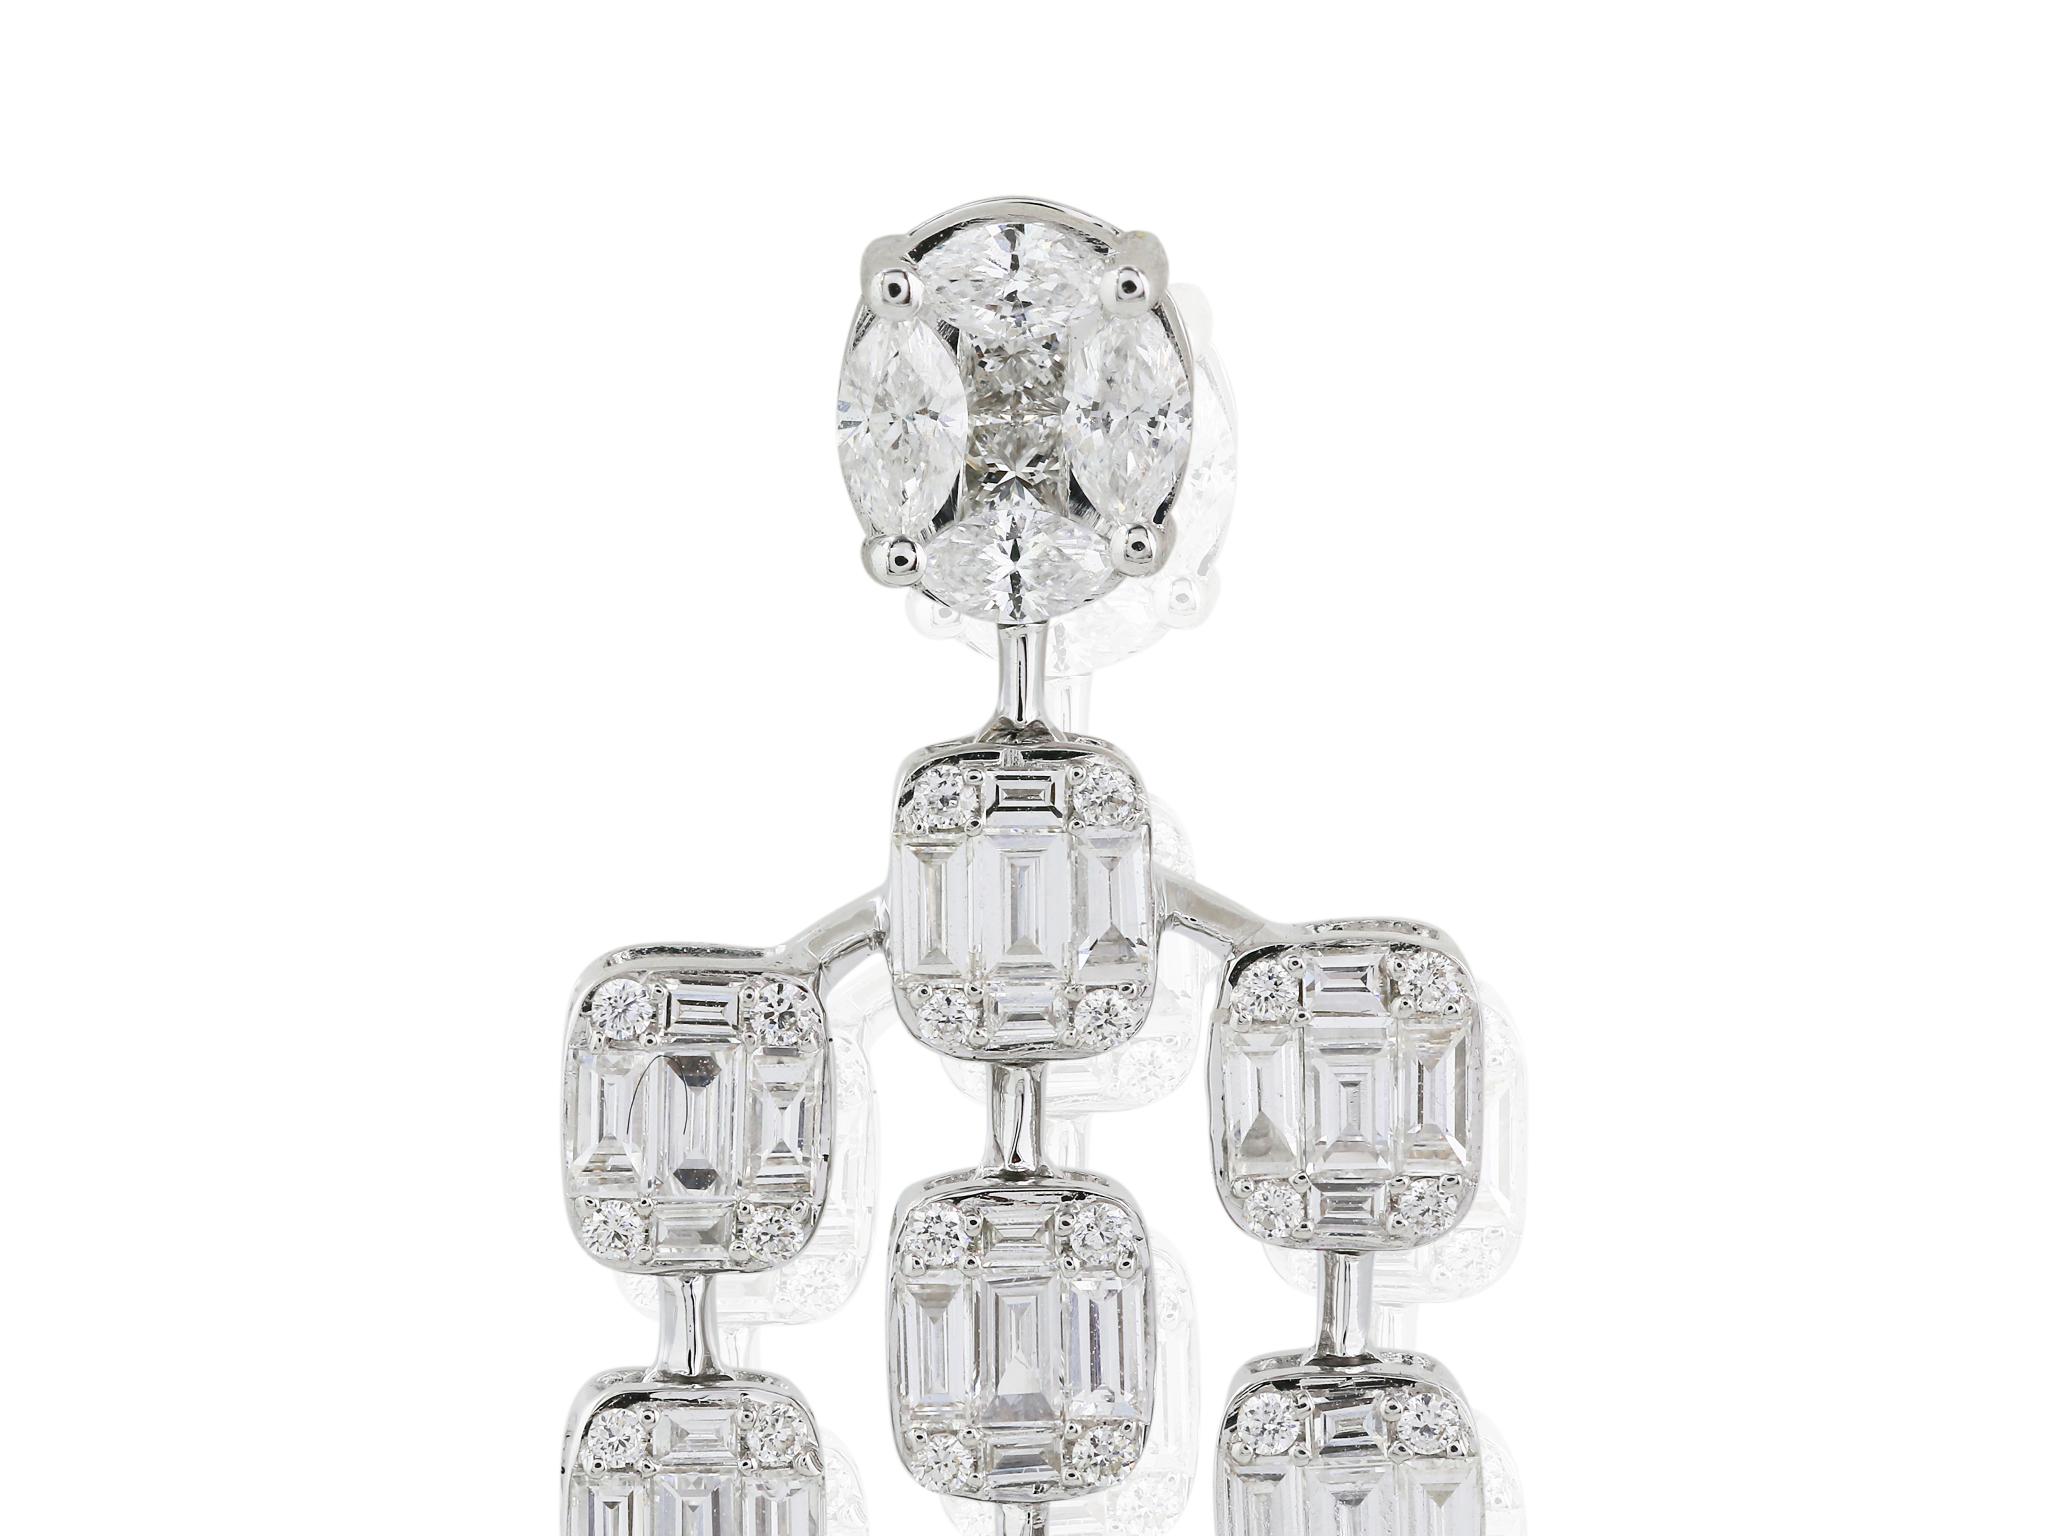 Stunning 18 karat white gold diamond chandelier earrings consisting of round brilliant cut, pear, marquise, and emerald cut diamonds having a total weight of 3.45 carats with a clarity of G VS2 respectively.